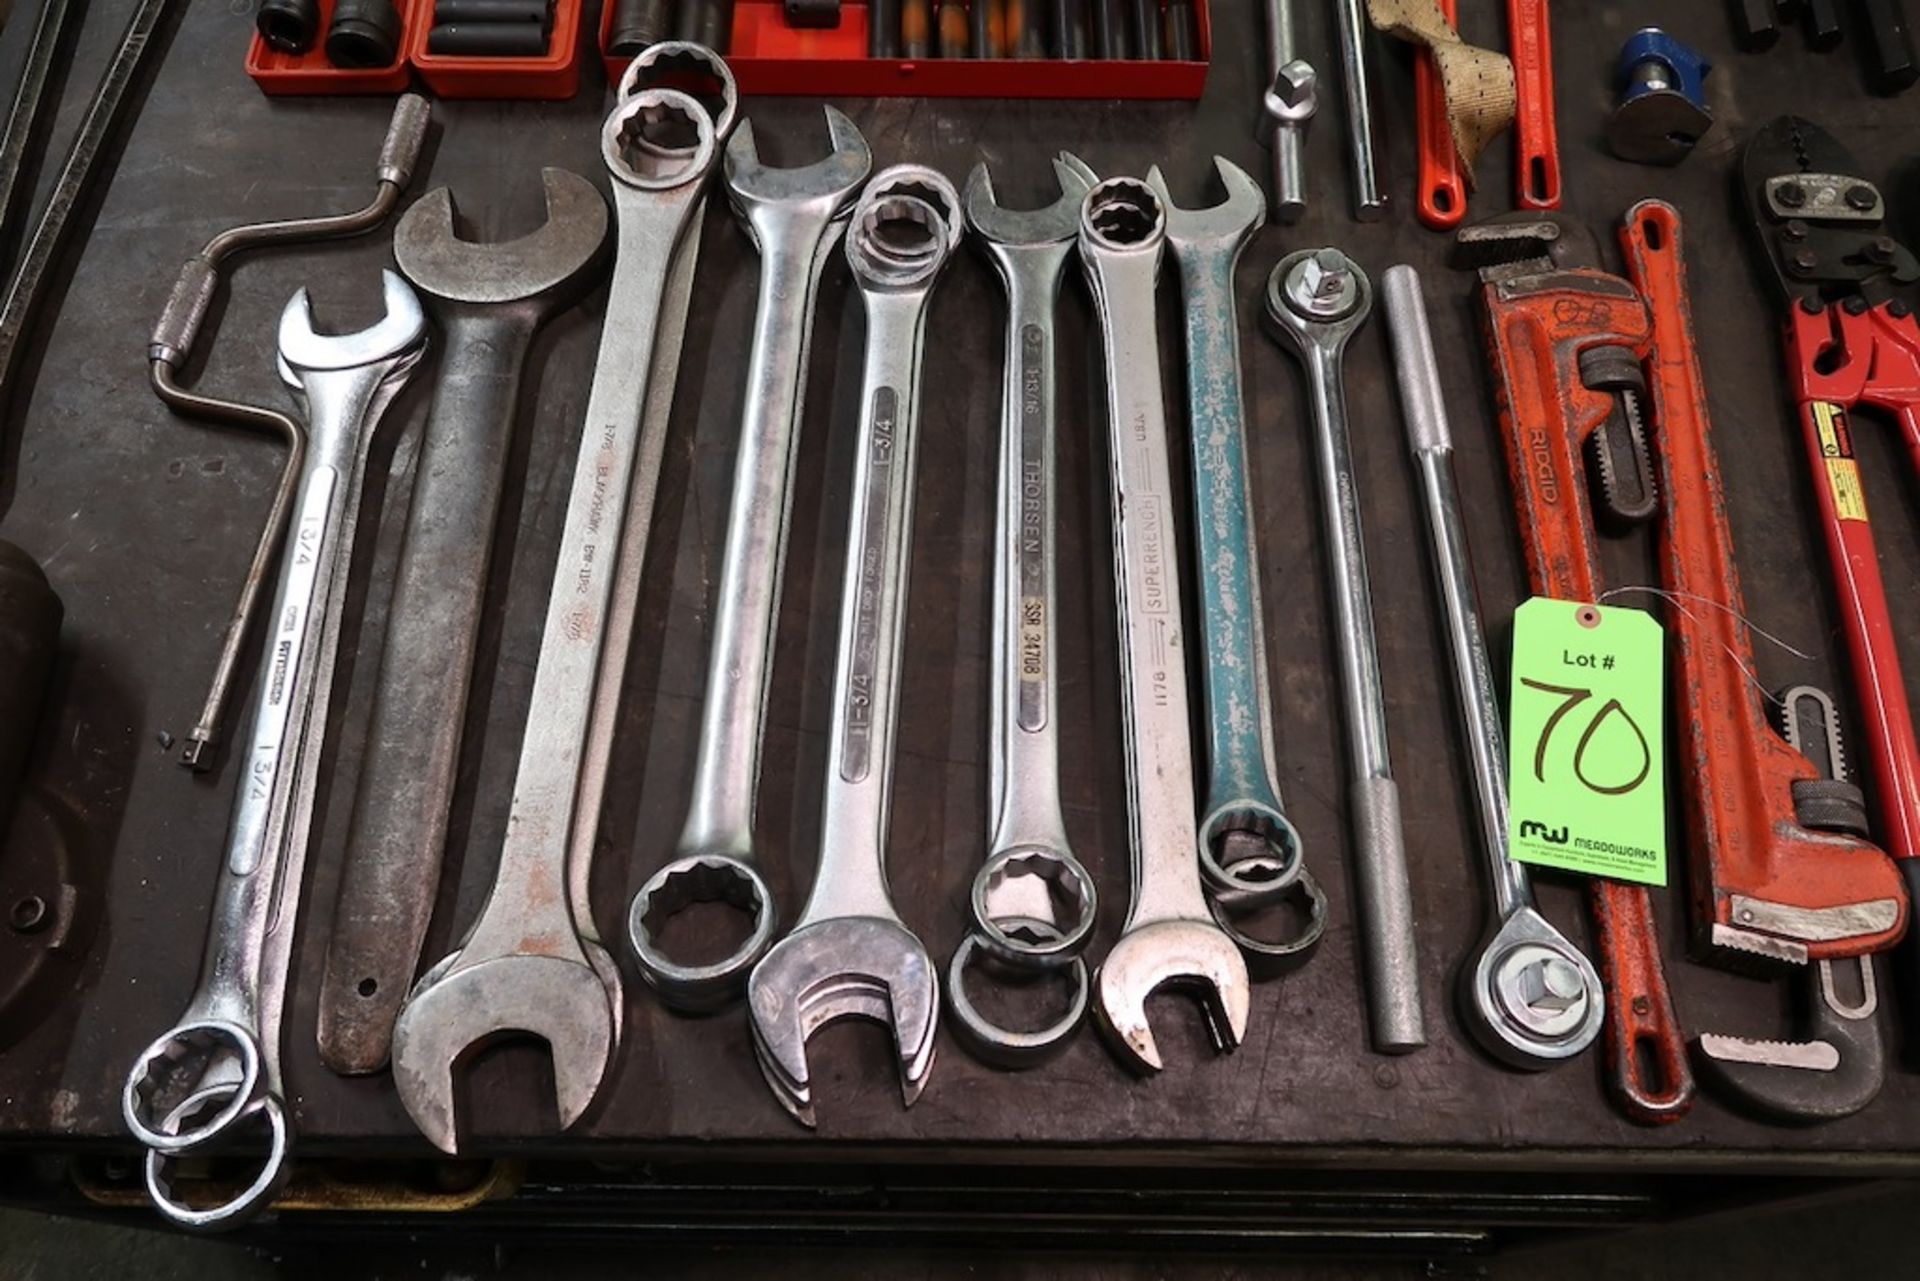 Lot of Assorted Hand Tools to Include Wrenches, Impact Sockets, Etc. - Image 3 of 4